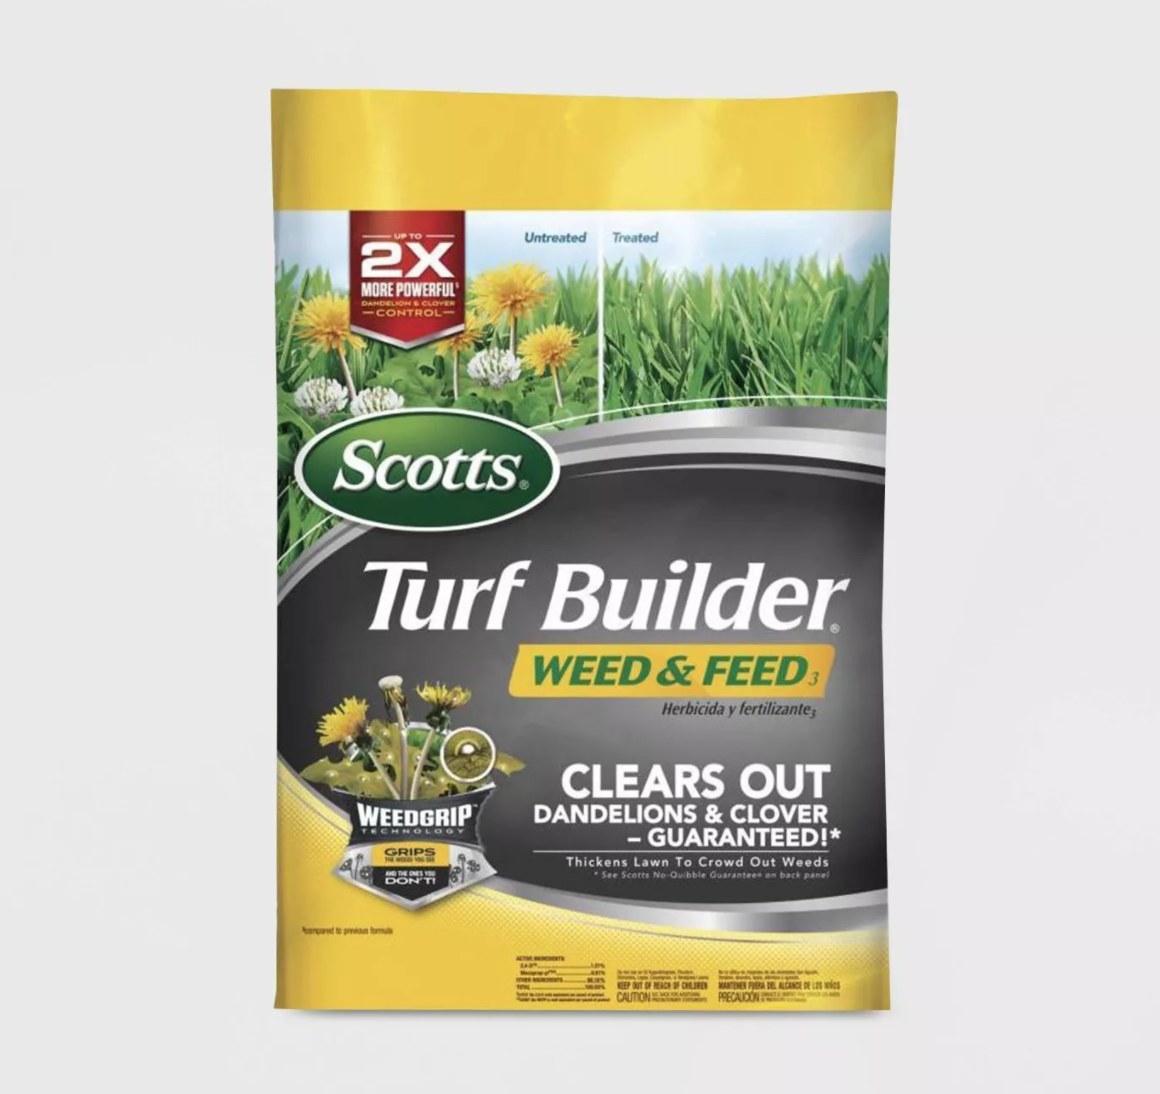 A plastic yellow and black bag of Scotts Turf Builder 